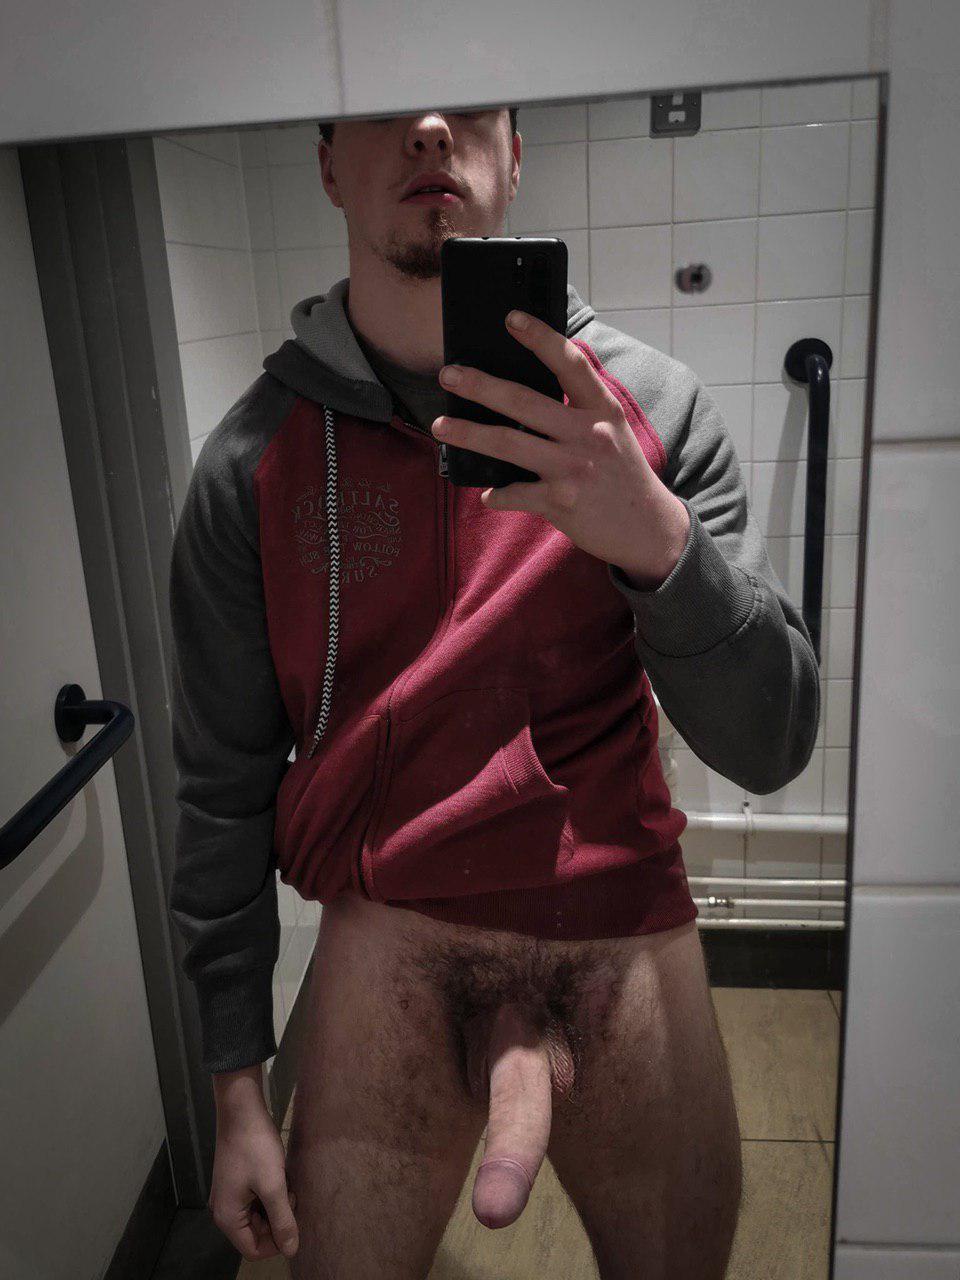 den russell share selfies of naked guys photos